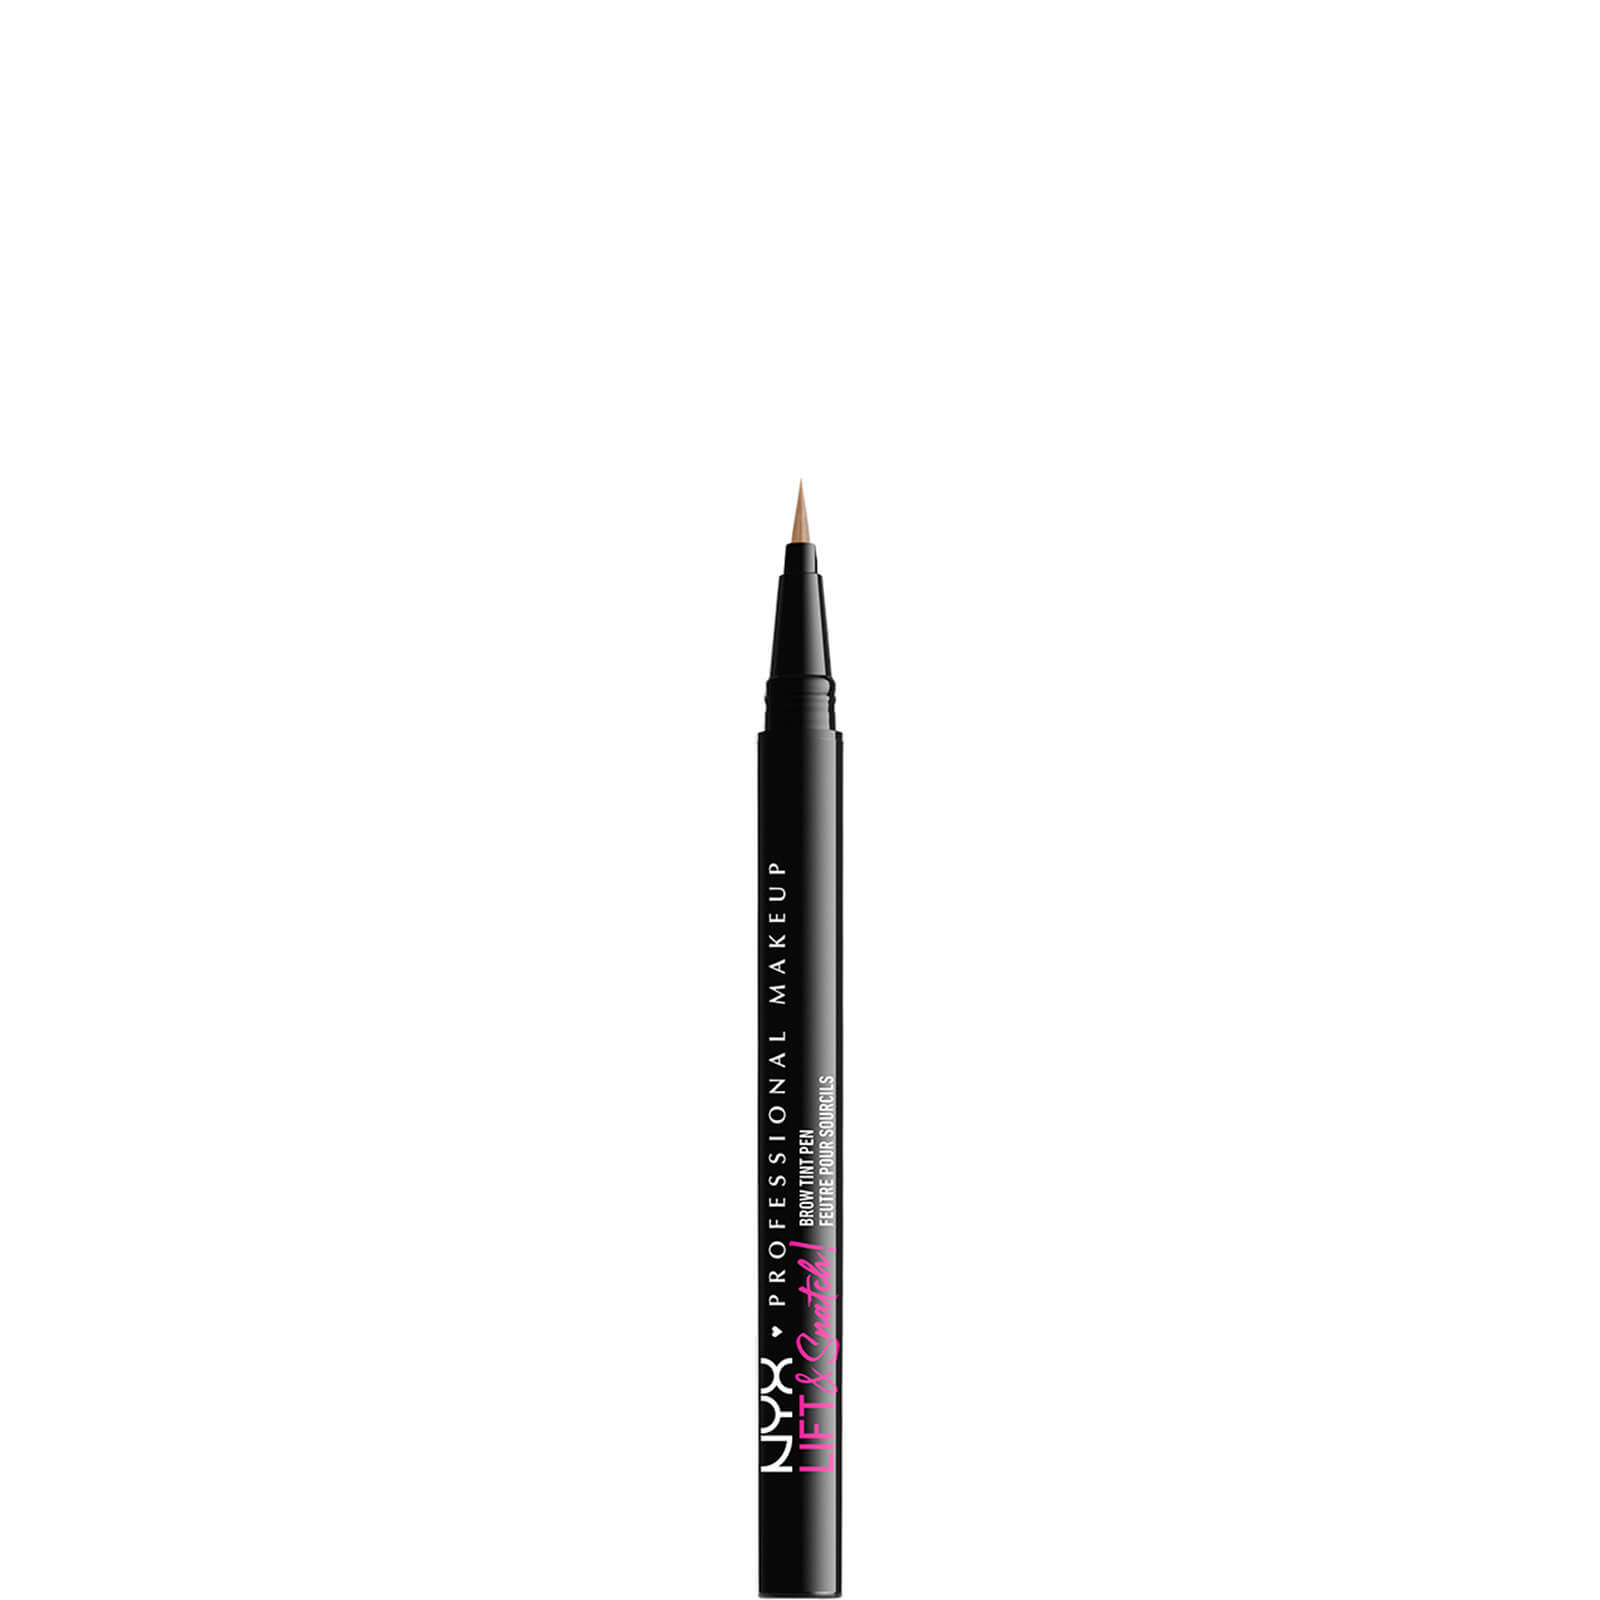 NYX Professional Makeup Lift and Snatch Brow Tint Pen 3g (Various Shades) - Taupe von NYX Professional Makeup